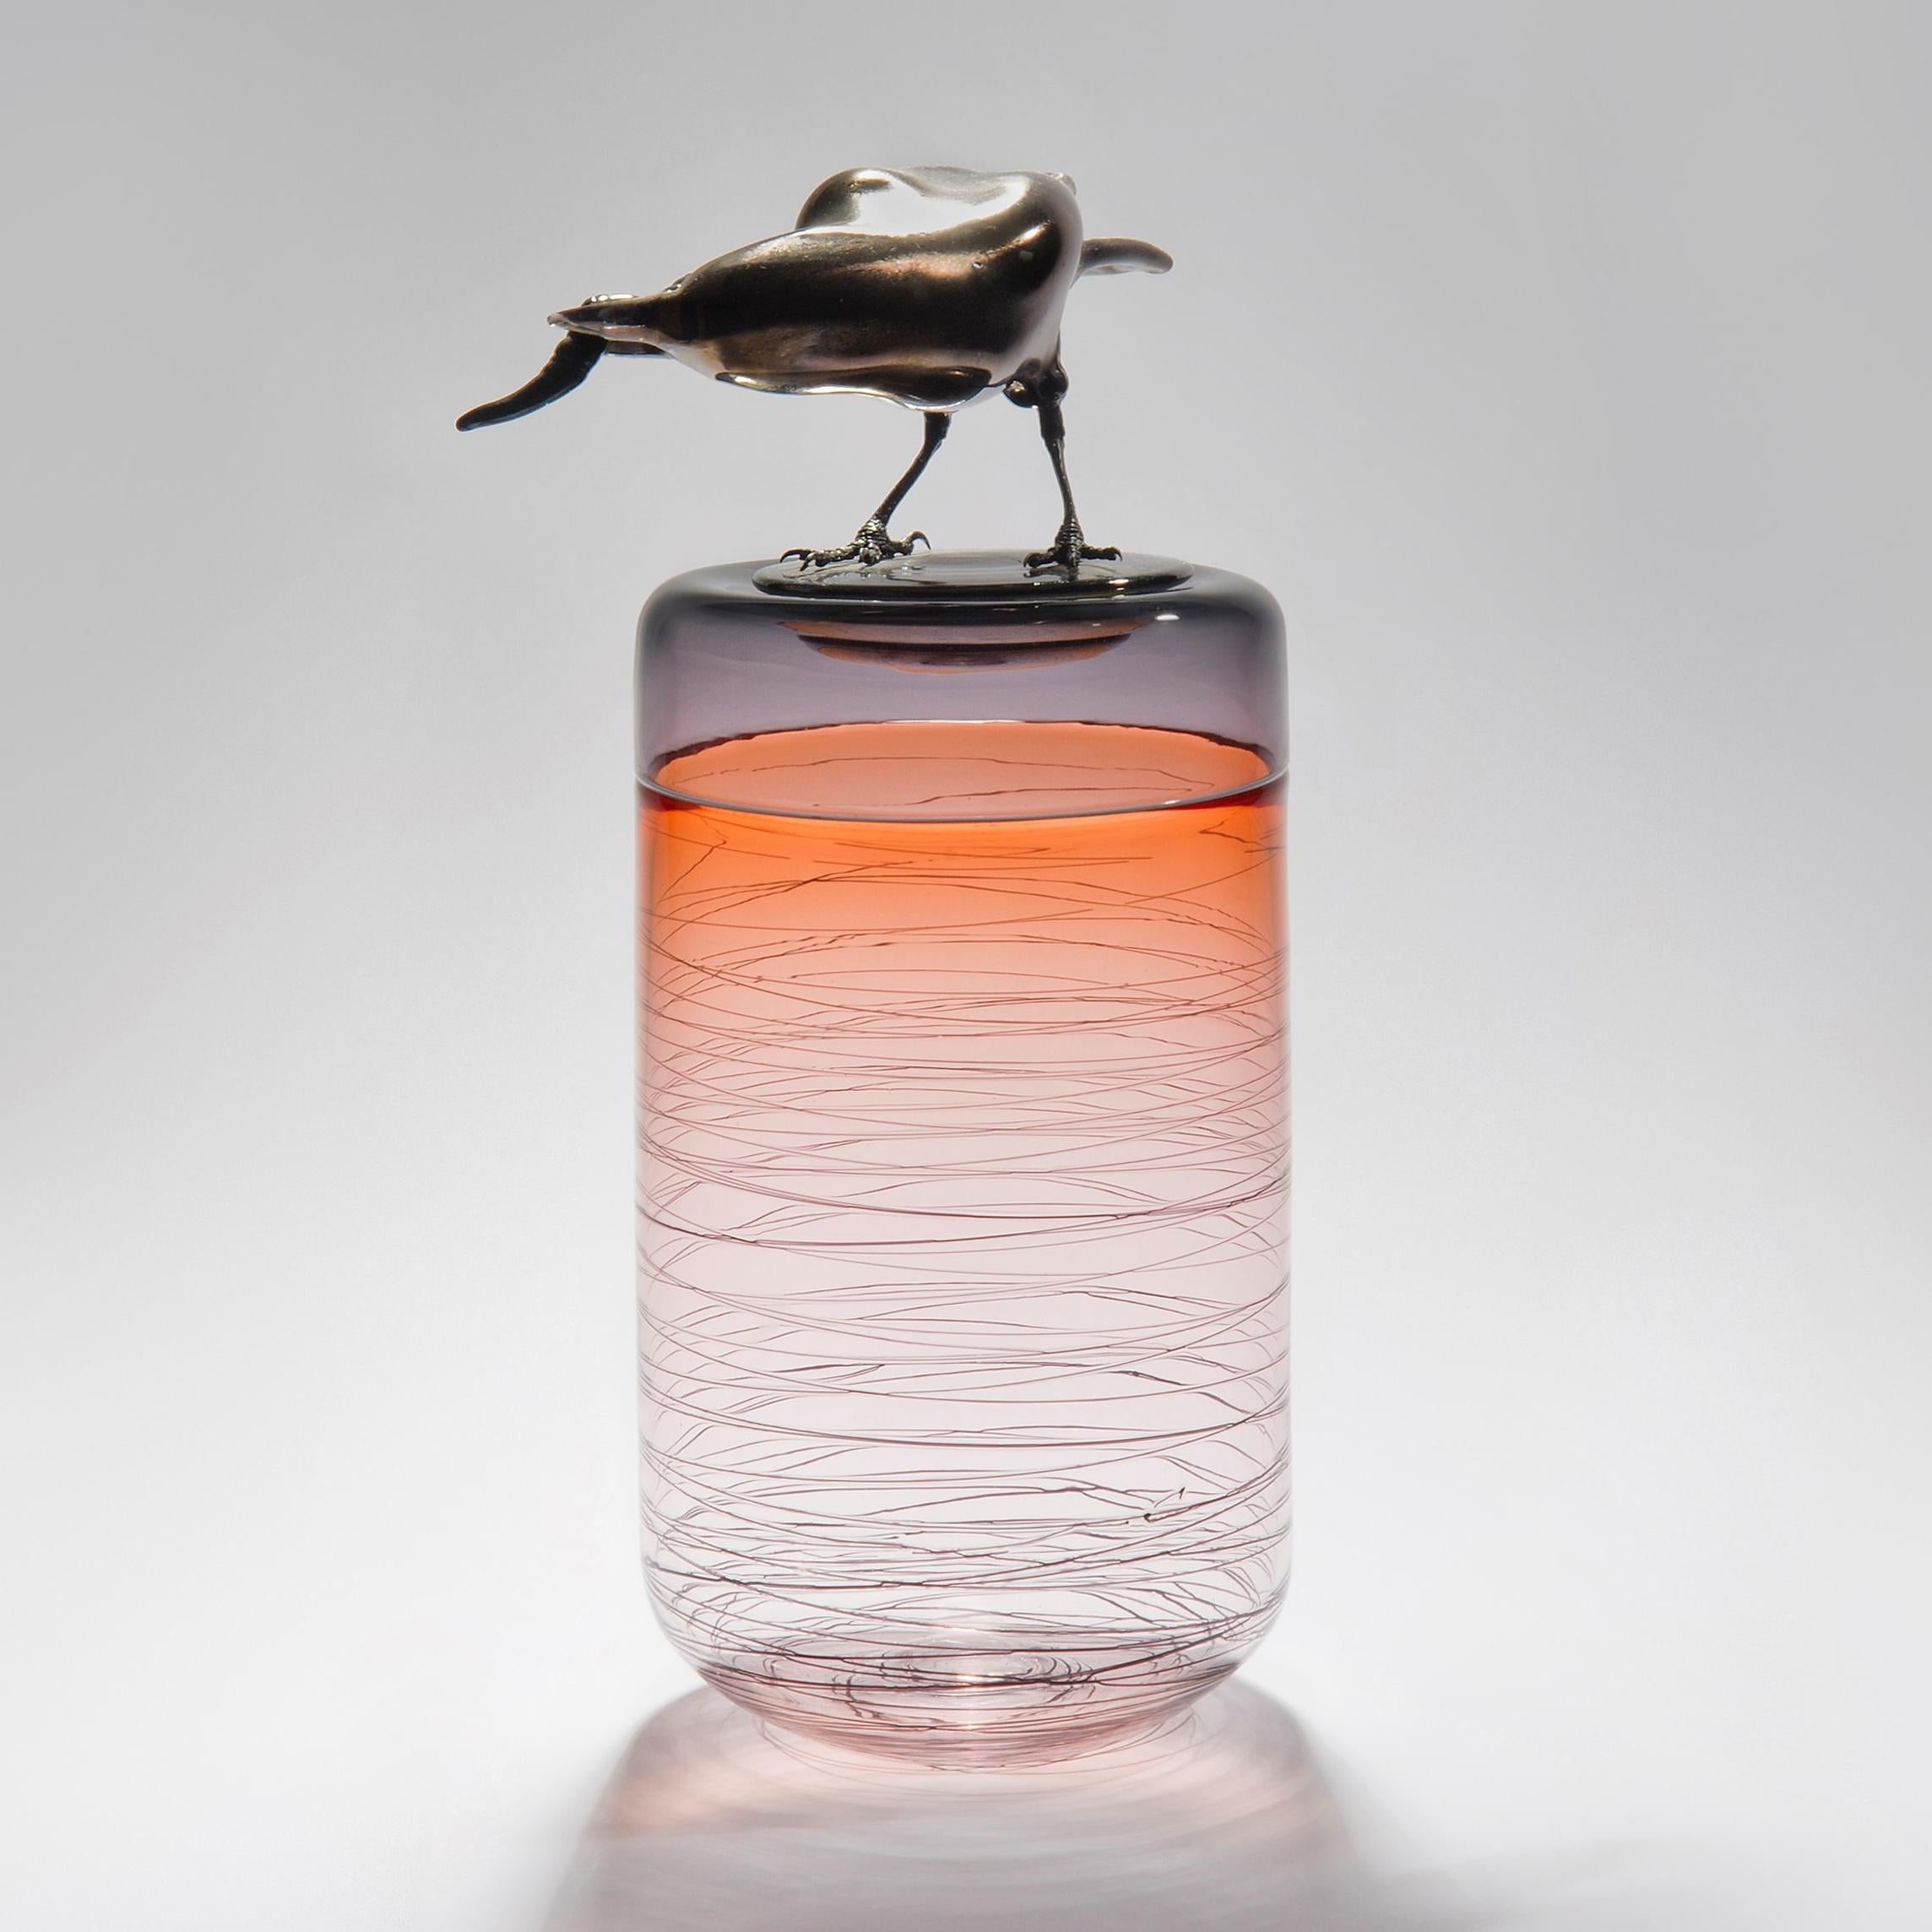 Gourmande, is a hand-blown art glass vase in apricot with a removable lid adorned with a hot sculpted black glass crow holding a worm by the British artist Julie Johnson. The crow figurine can also be lifted off with the main body leaving a